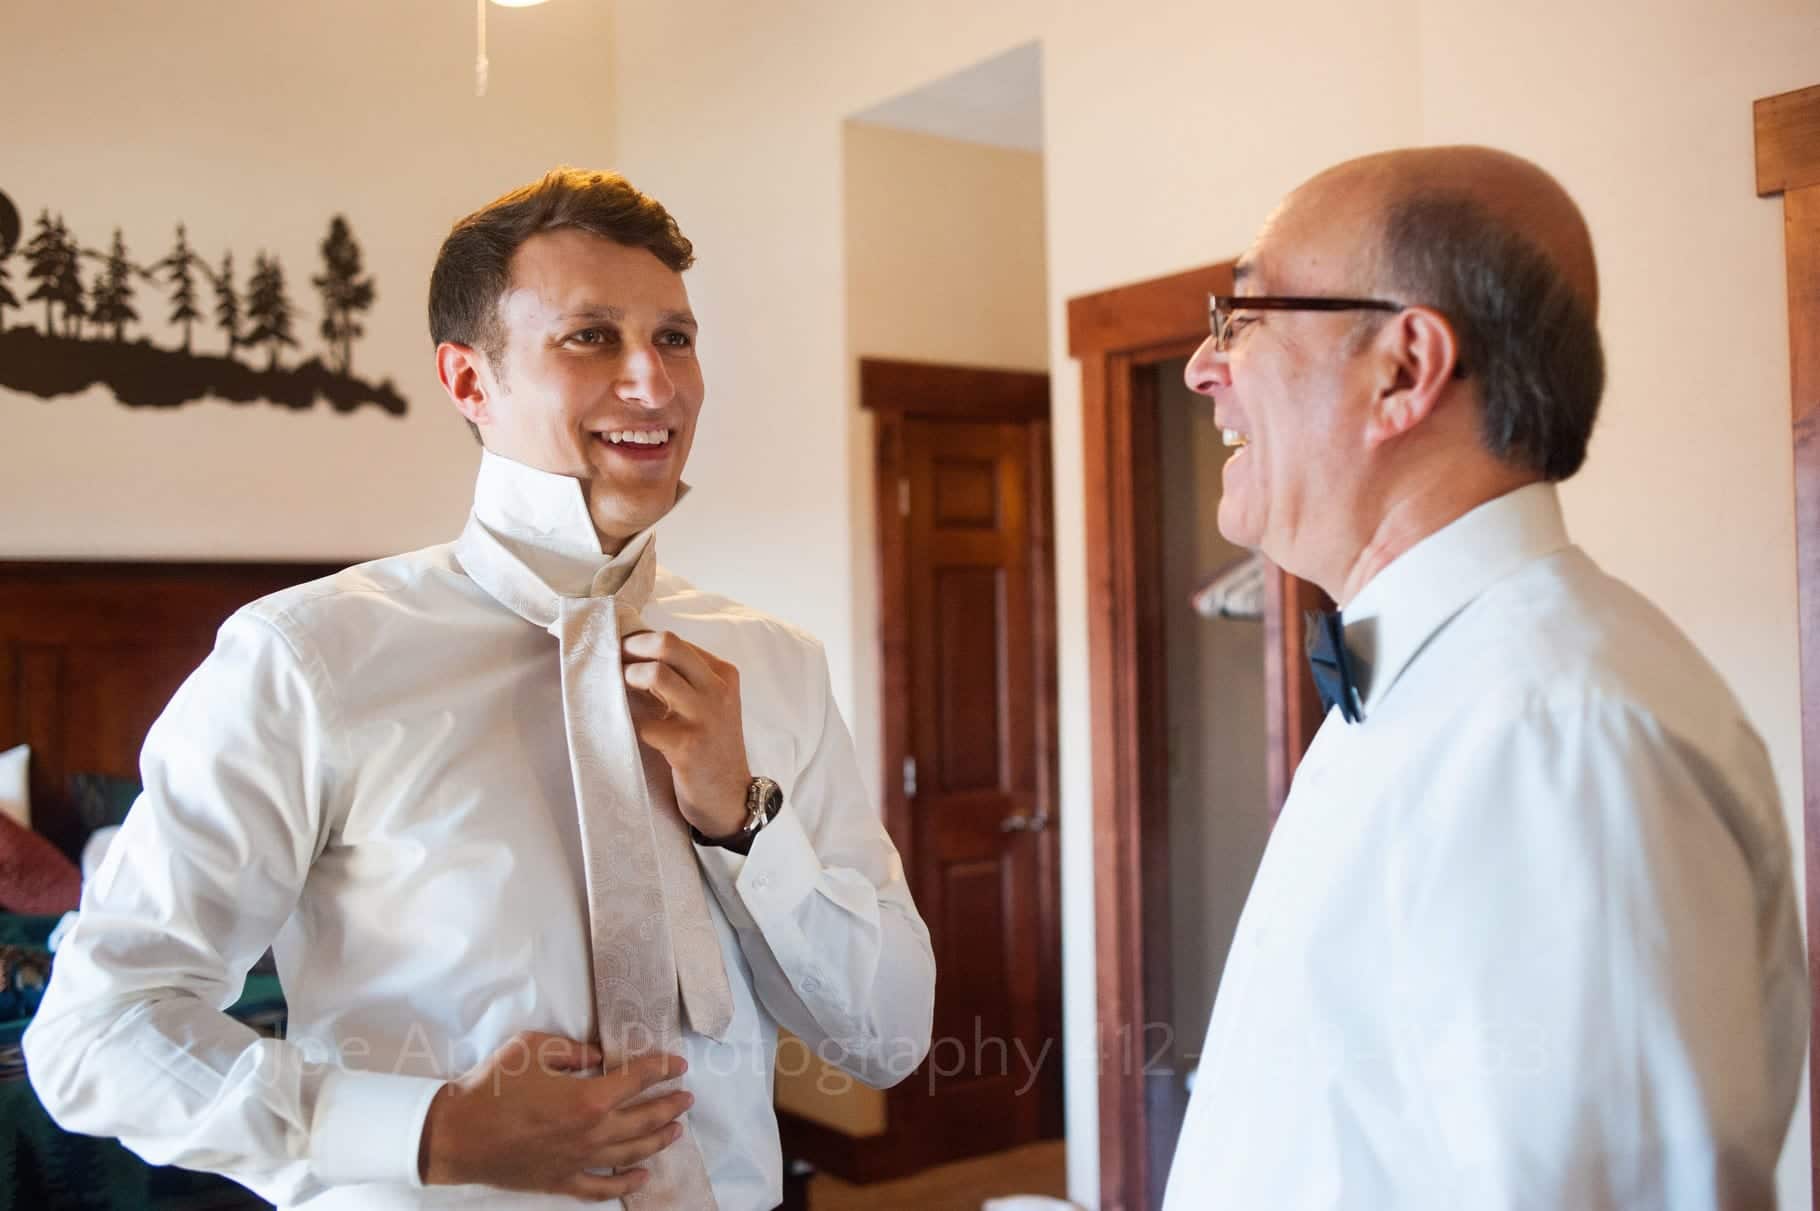 A young groom faces his father and smiles while putting on a pink tie before his wedding.